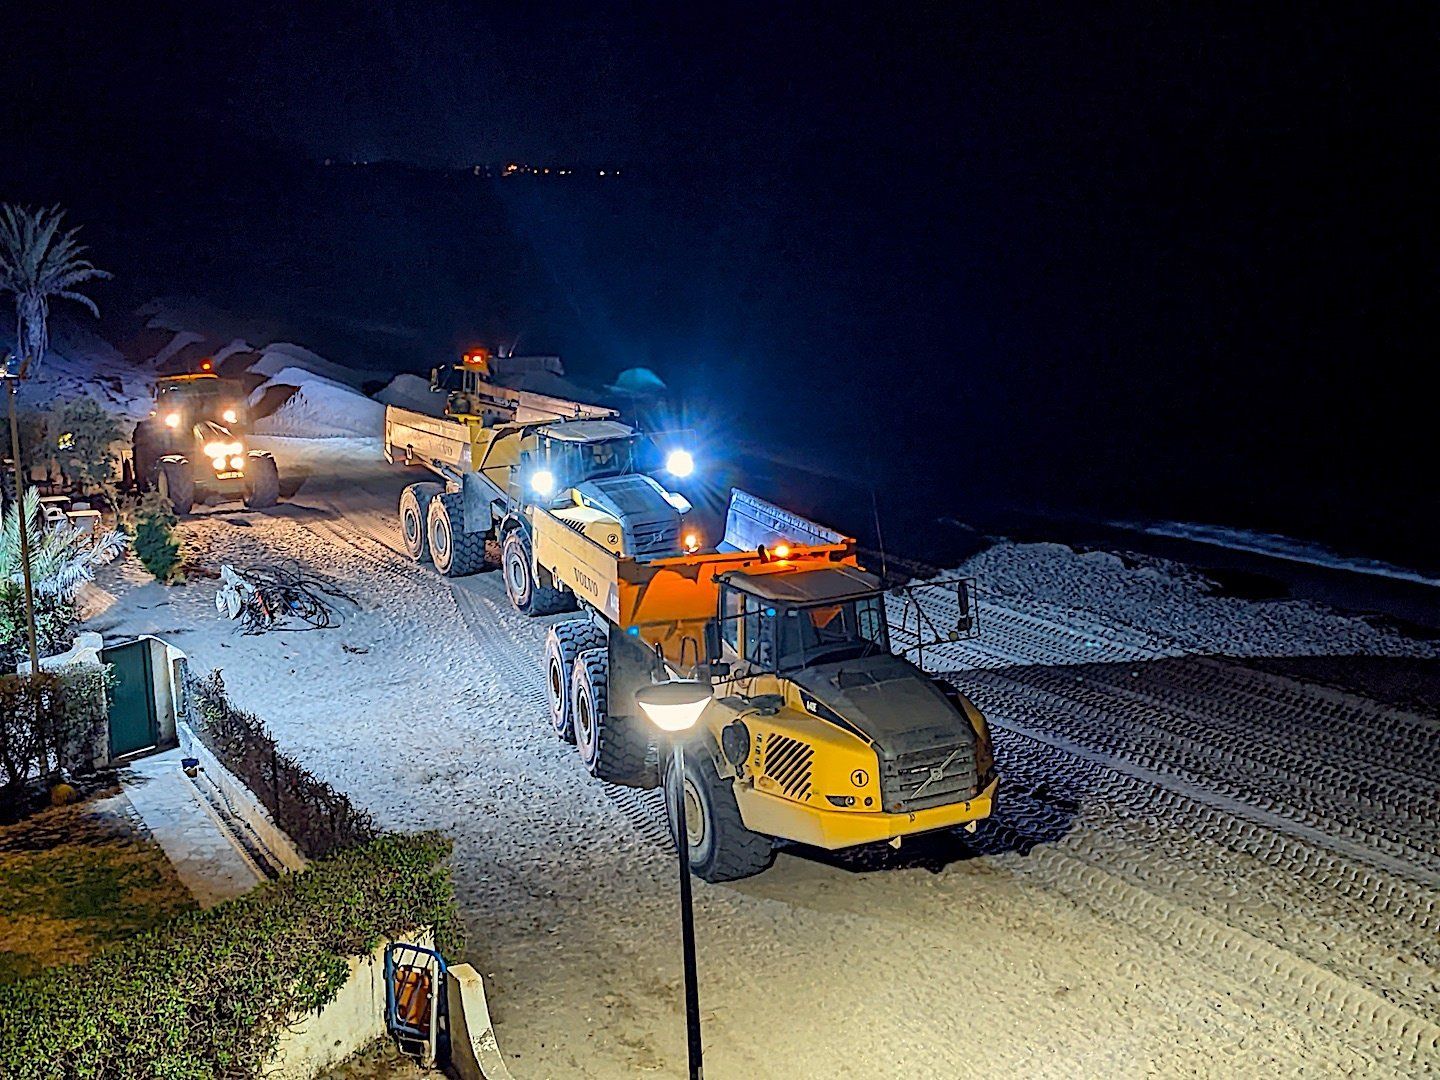 two trucks and a tractor working on a beach at night